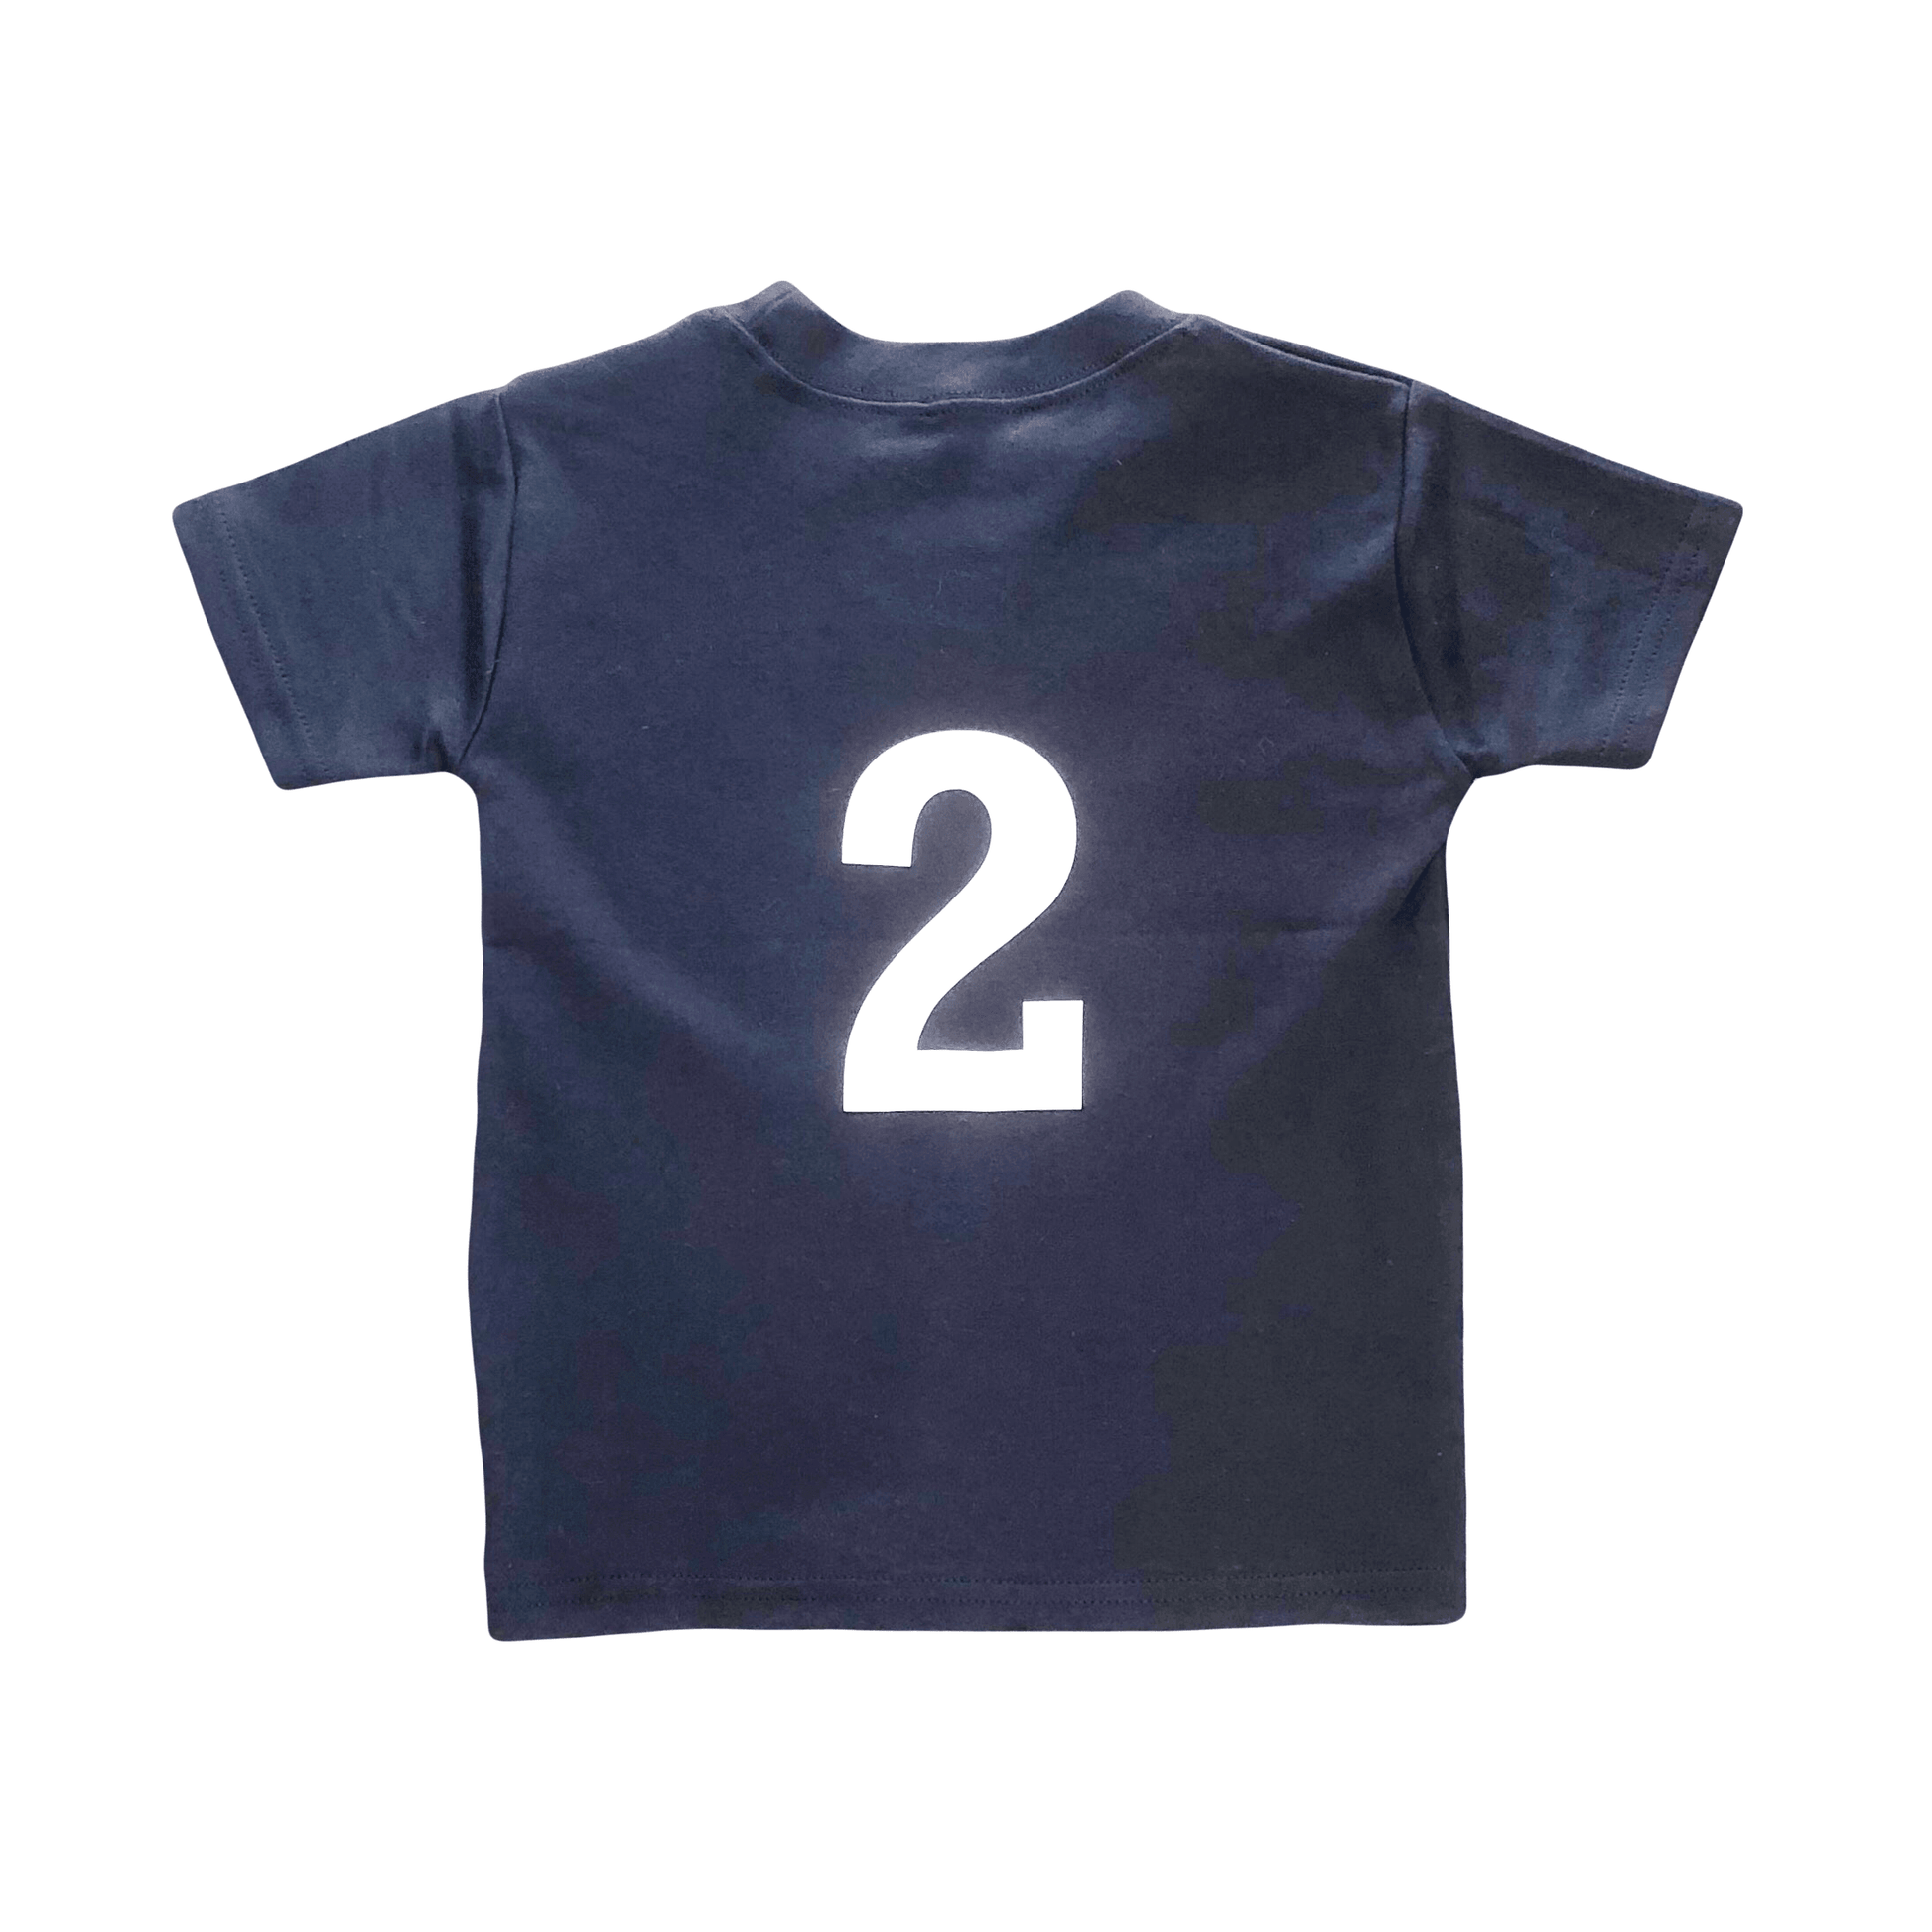 Awesome Since Print T-Shirt | Oscar & Me | Baby & Children’s Clothing & Accessories